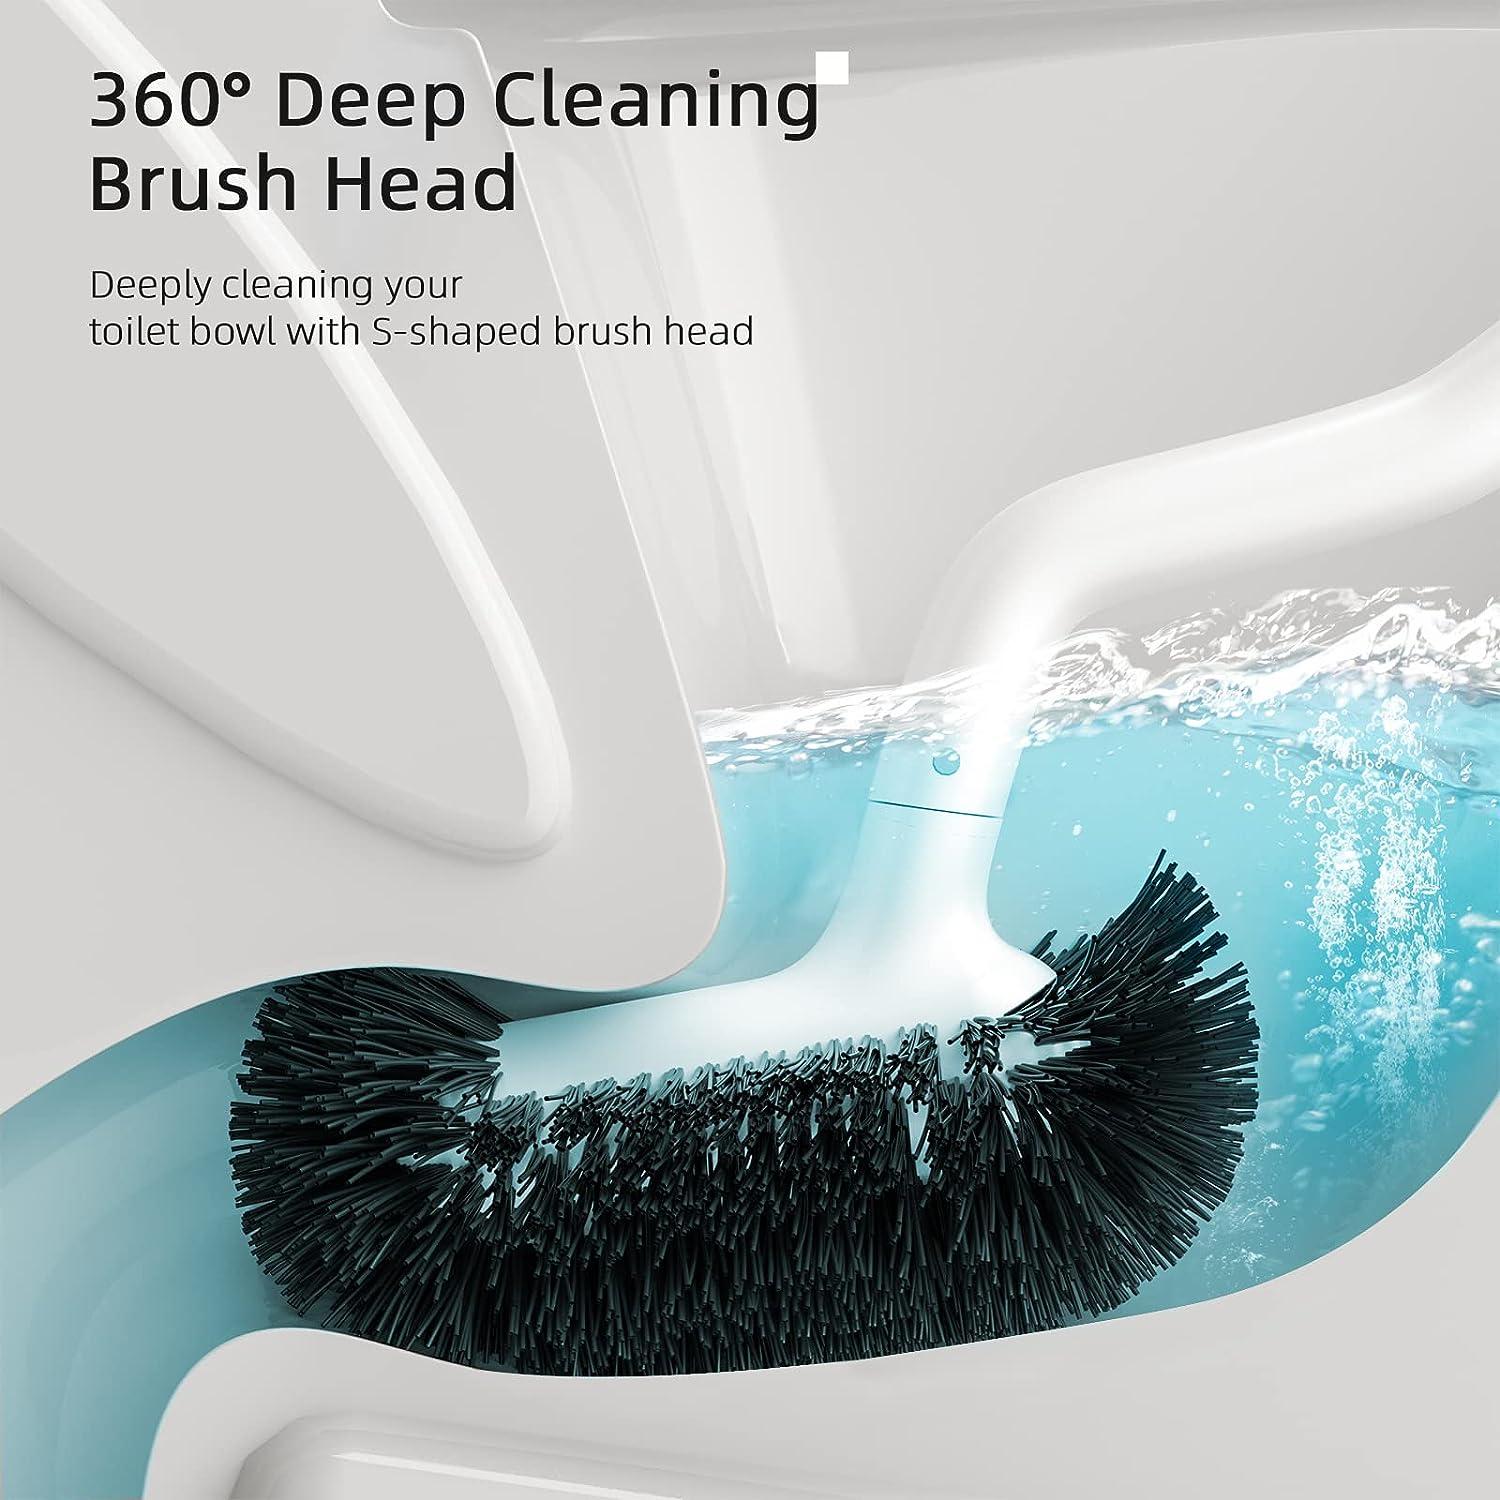 How to Deep Clean Your Toilet Brush & Holder